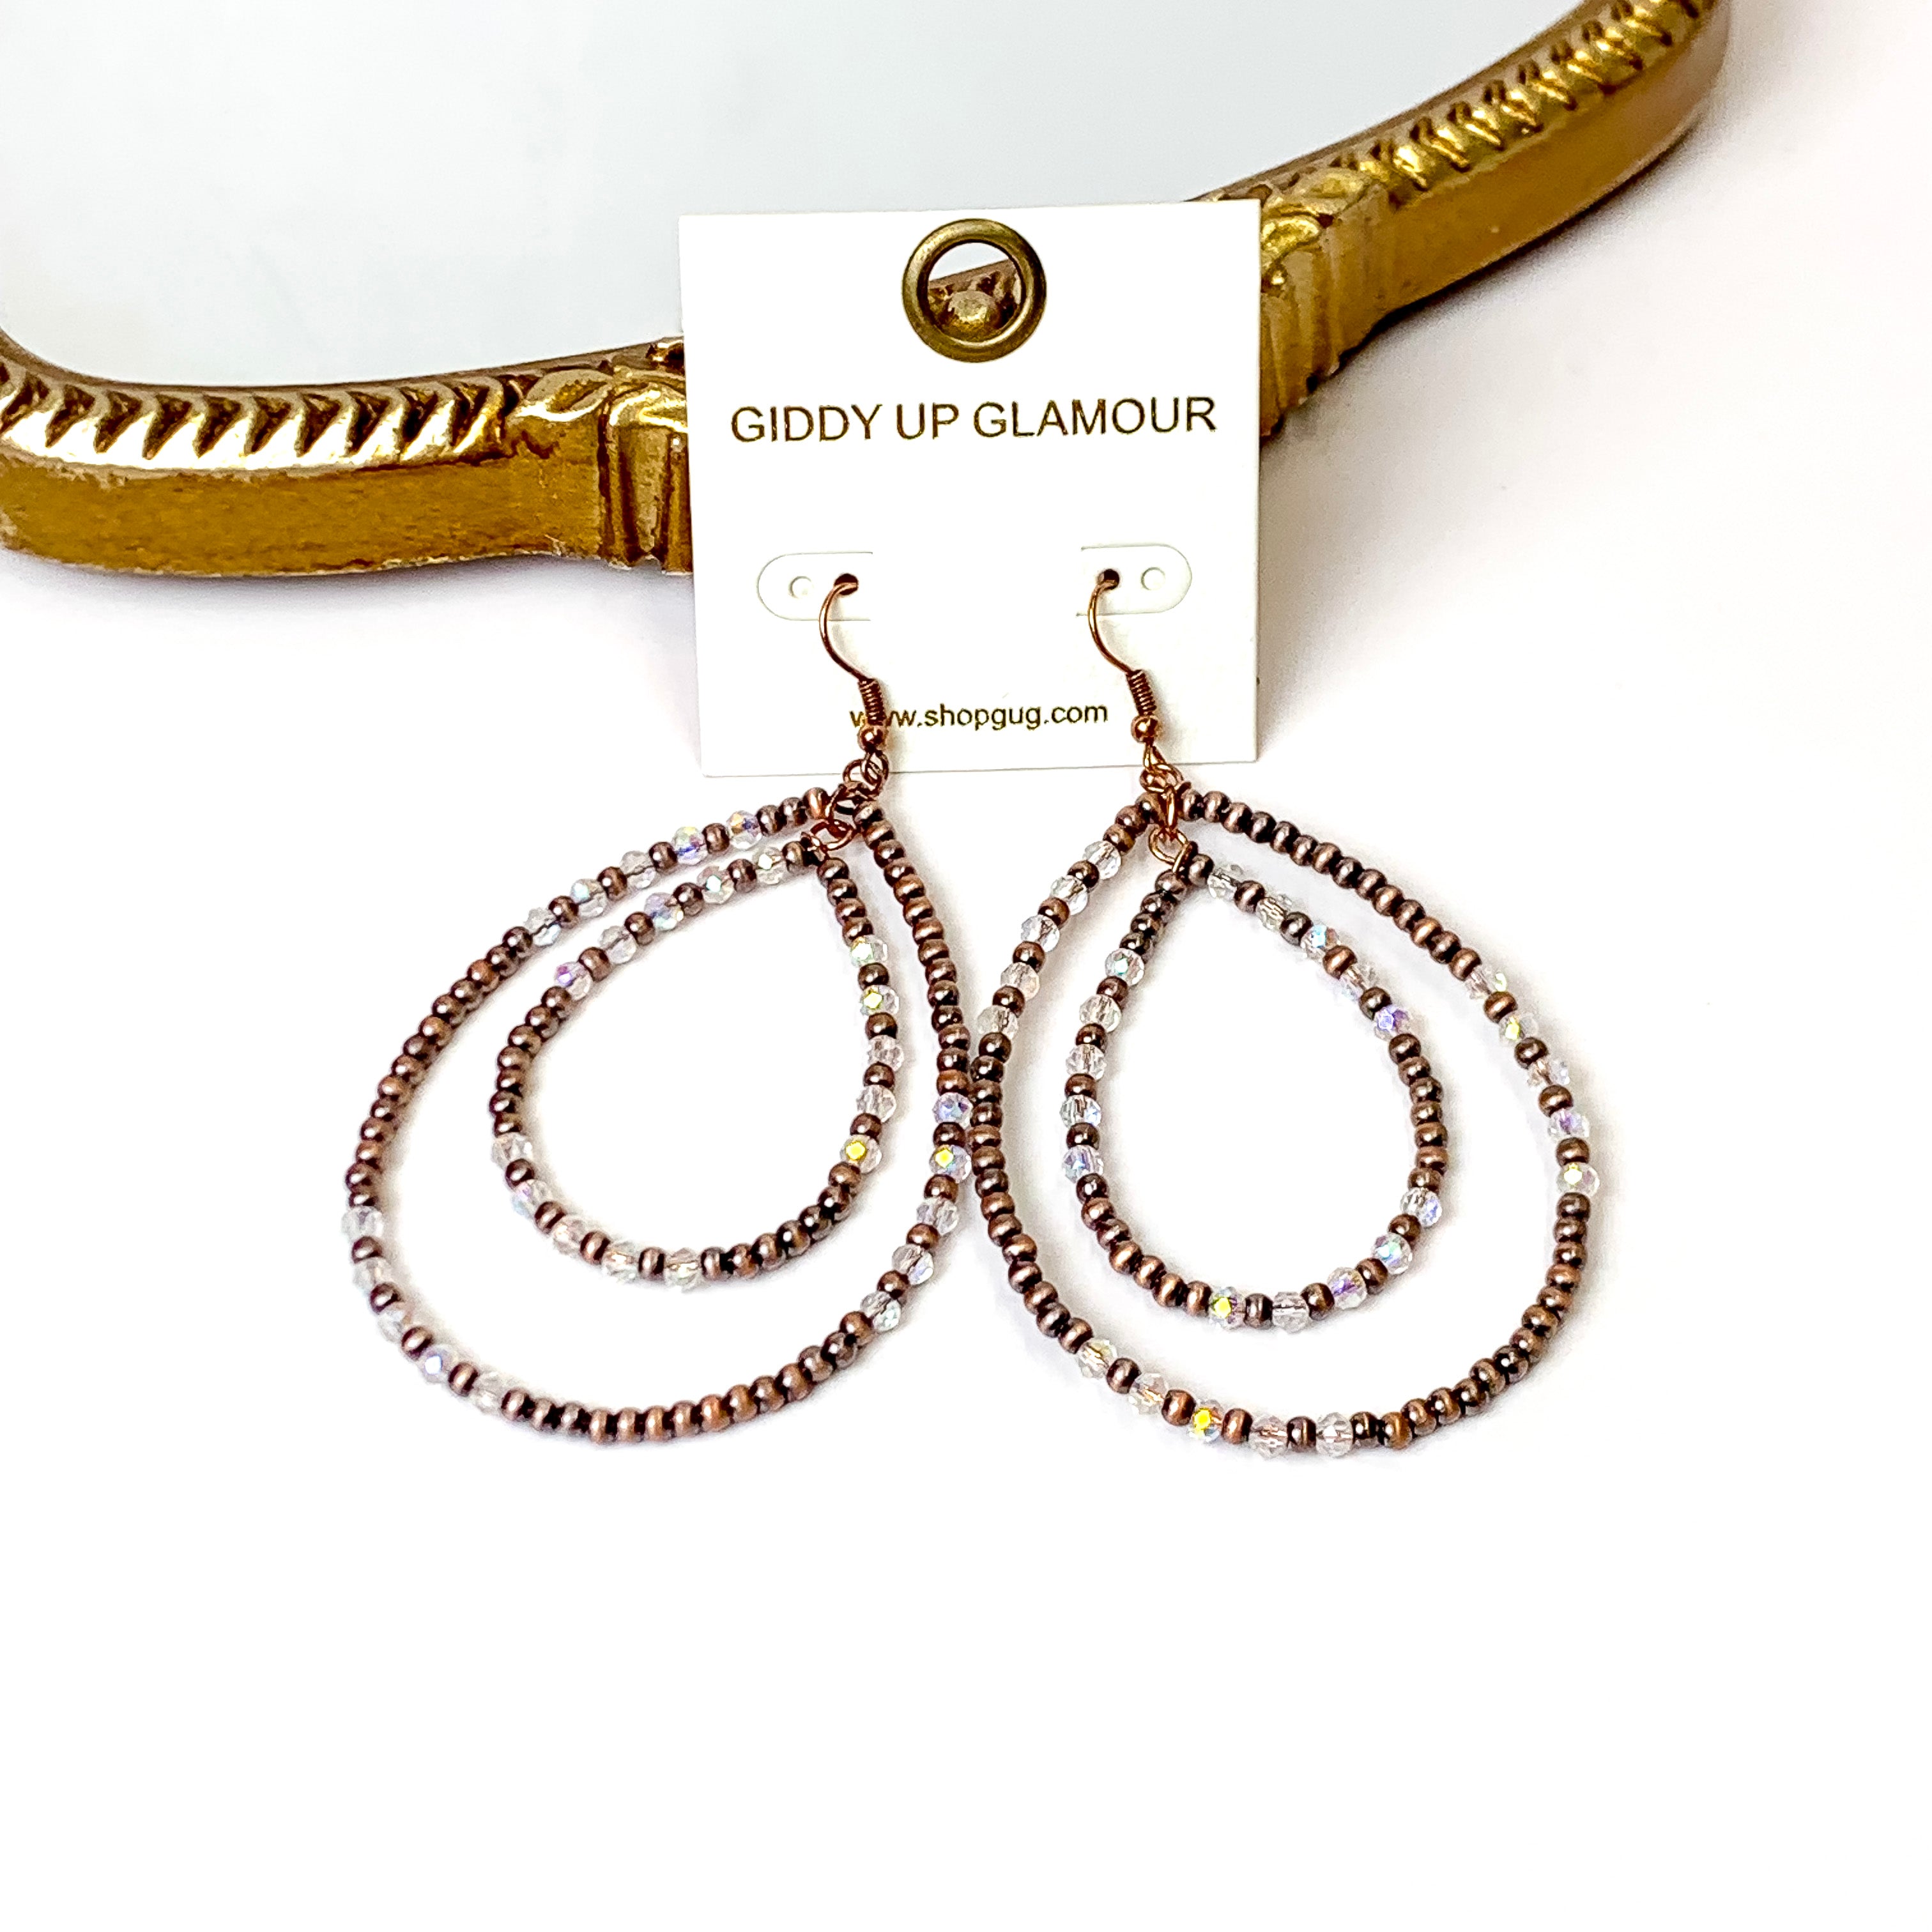 Layered Faux Navajo Pearl Beaded Teardrop Earrings with Clear Glass Spacers in Copper Tone - Giddy Up Glamour Boutique